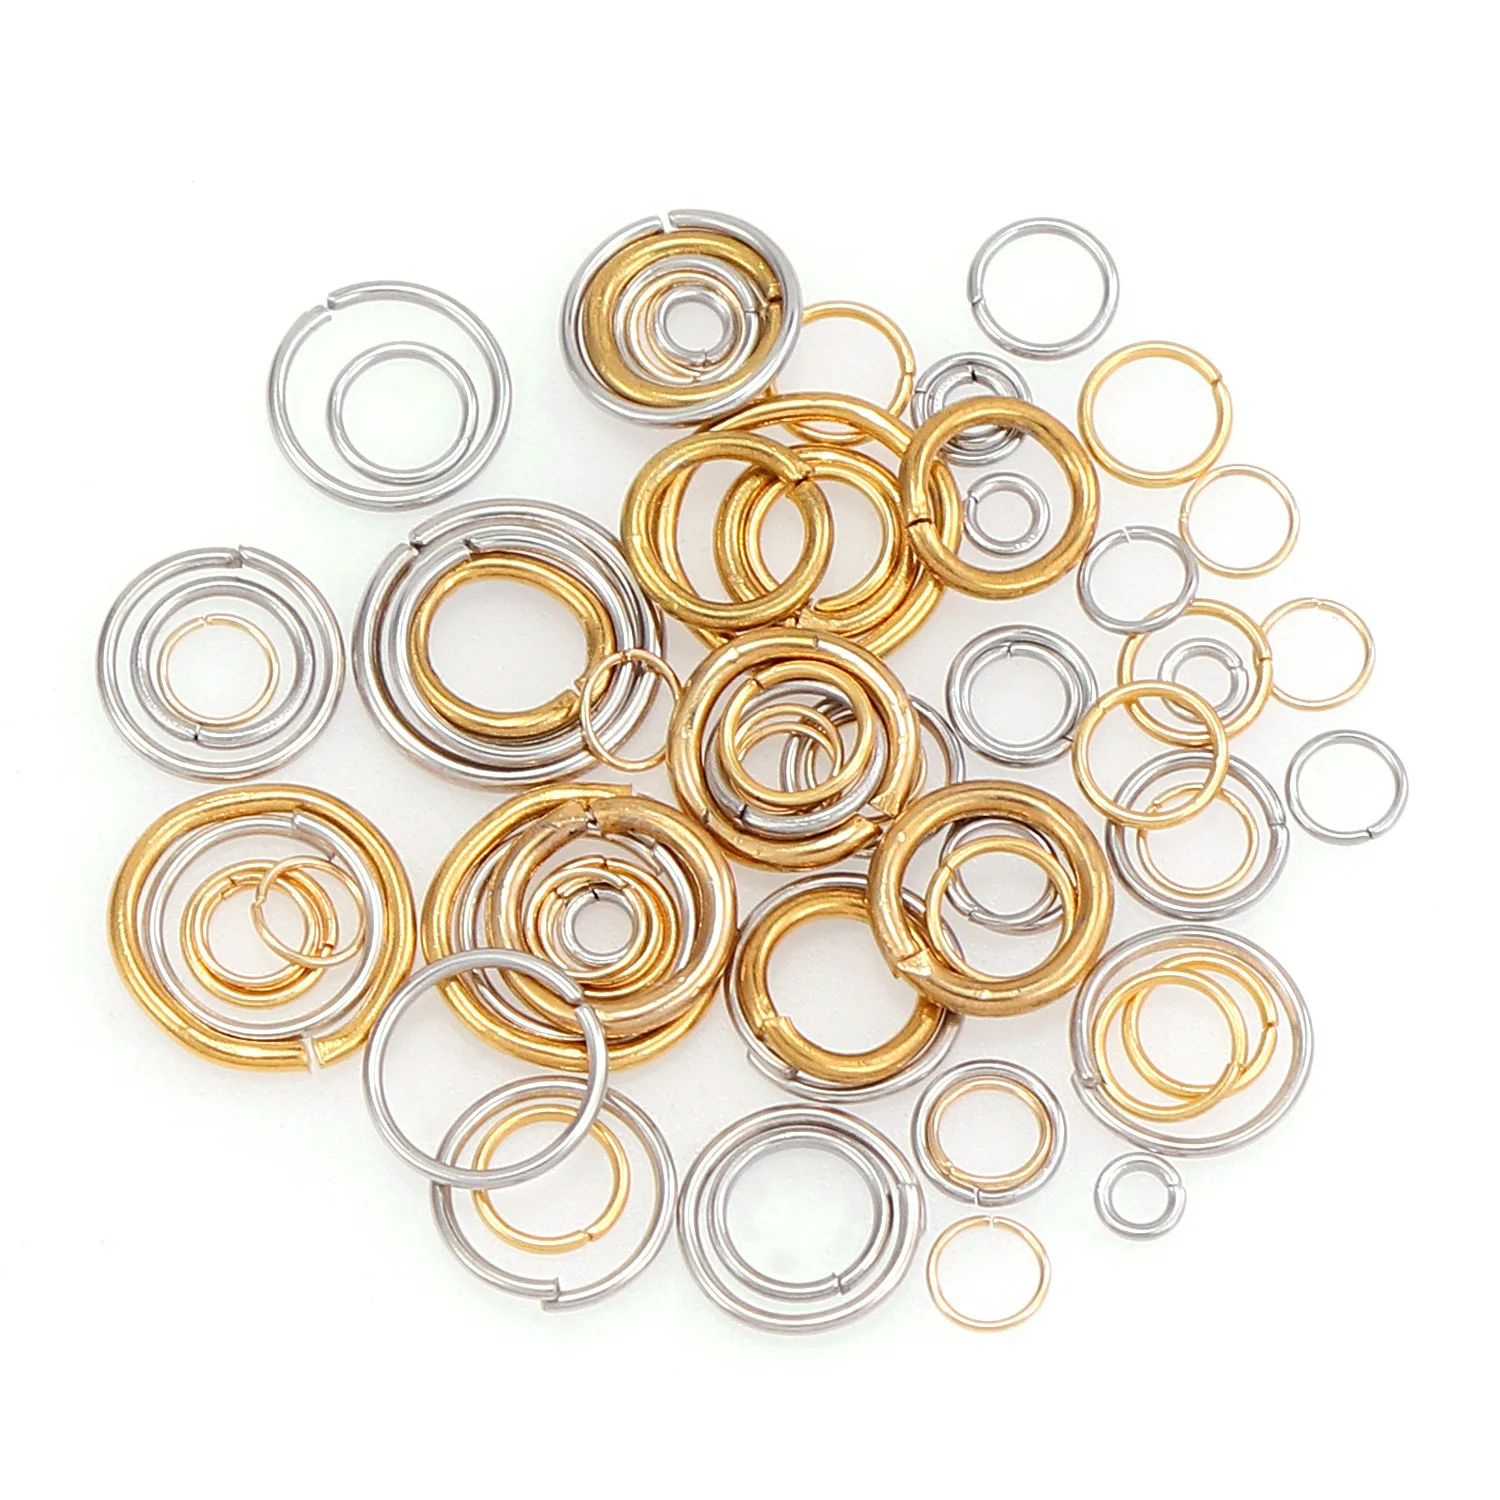 200Pcs Stainless Steel Open Jump Rings Split Rings Connector for Jewelry Making# 